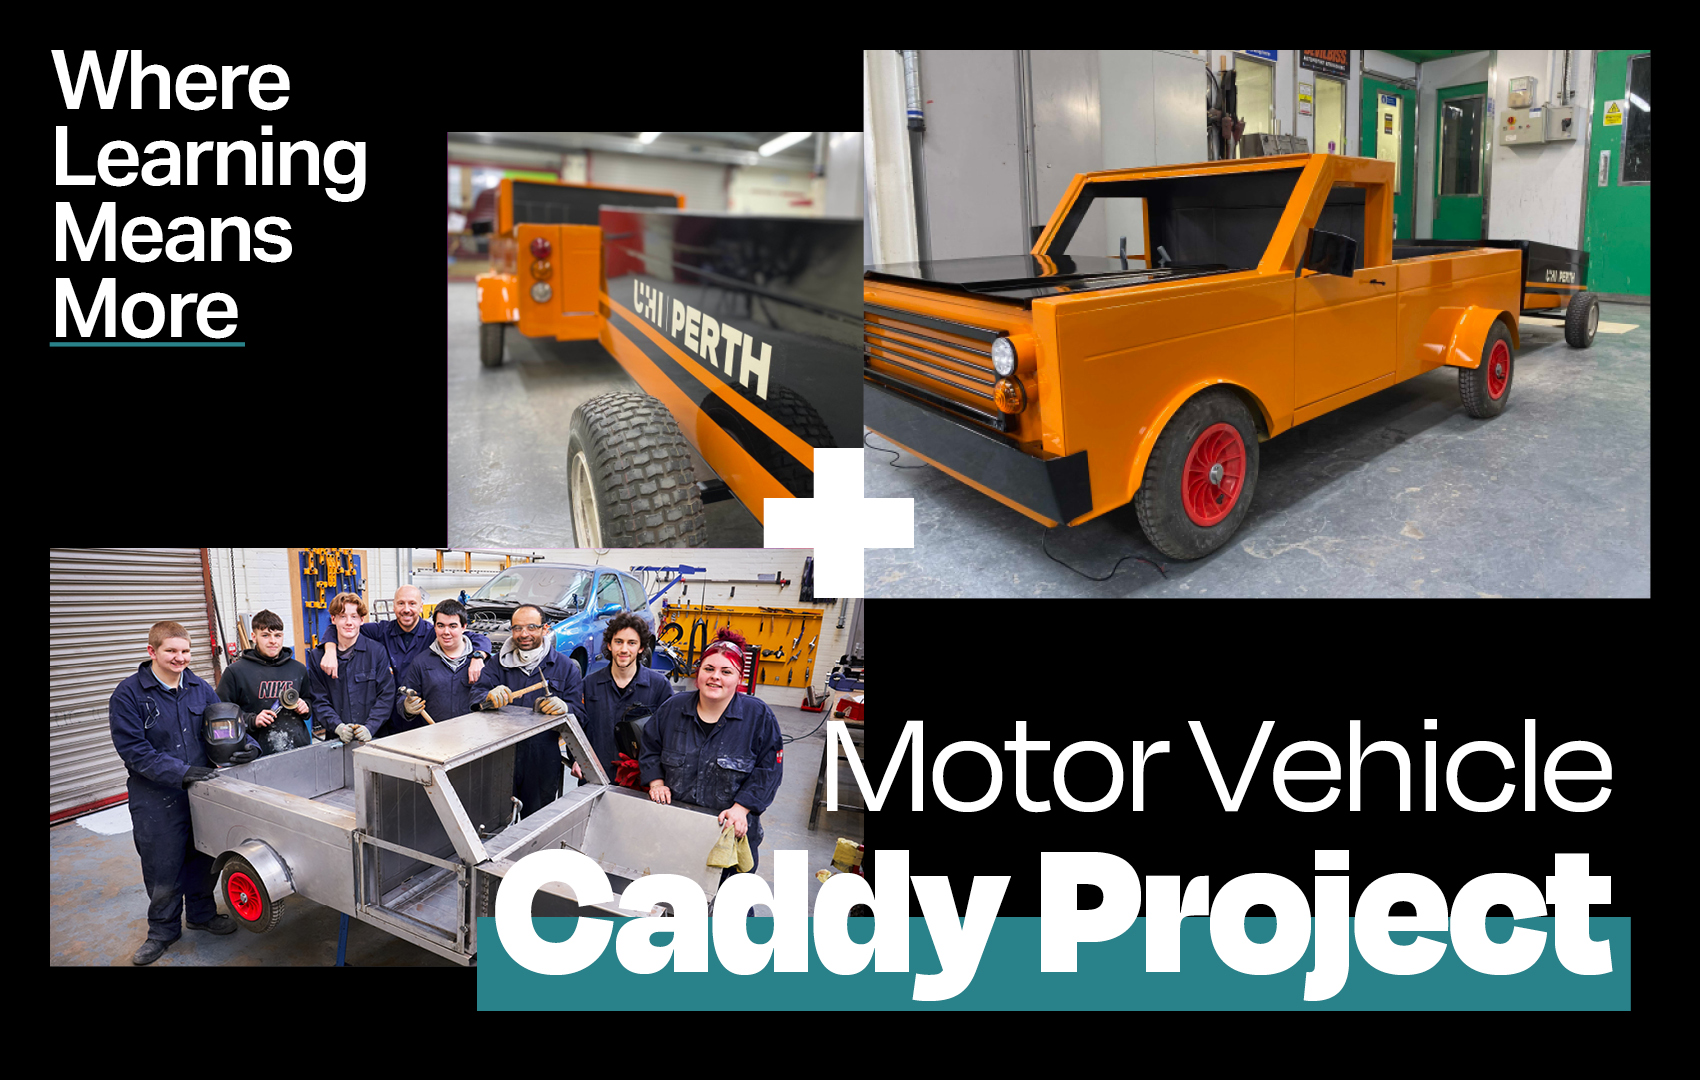 Motor Vehicle Project Caddy